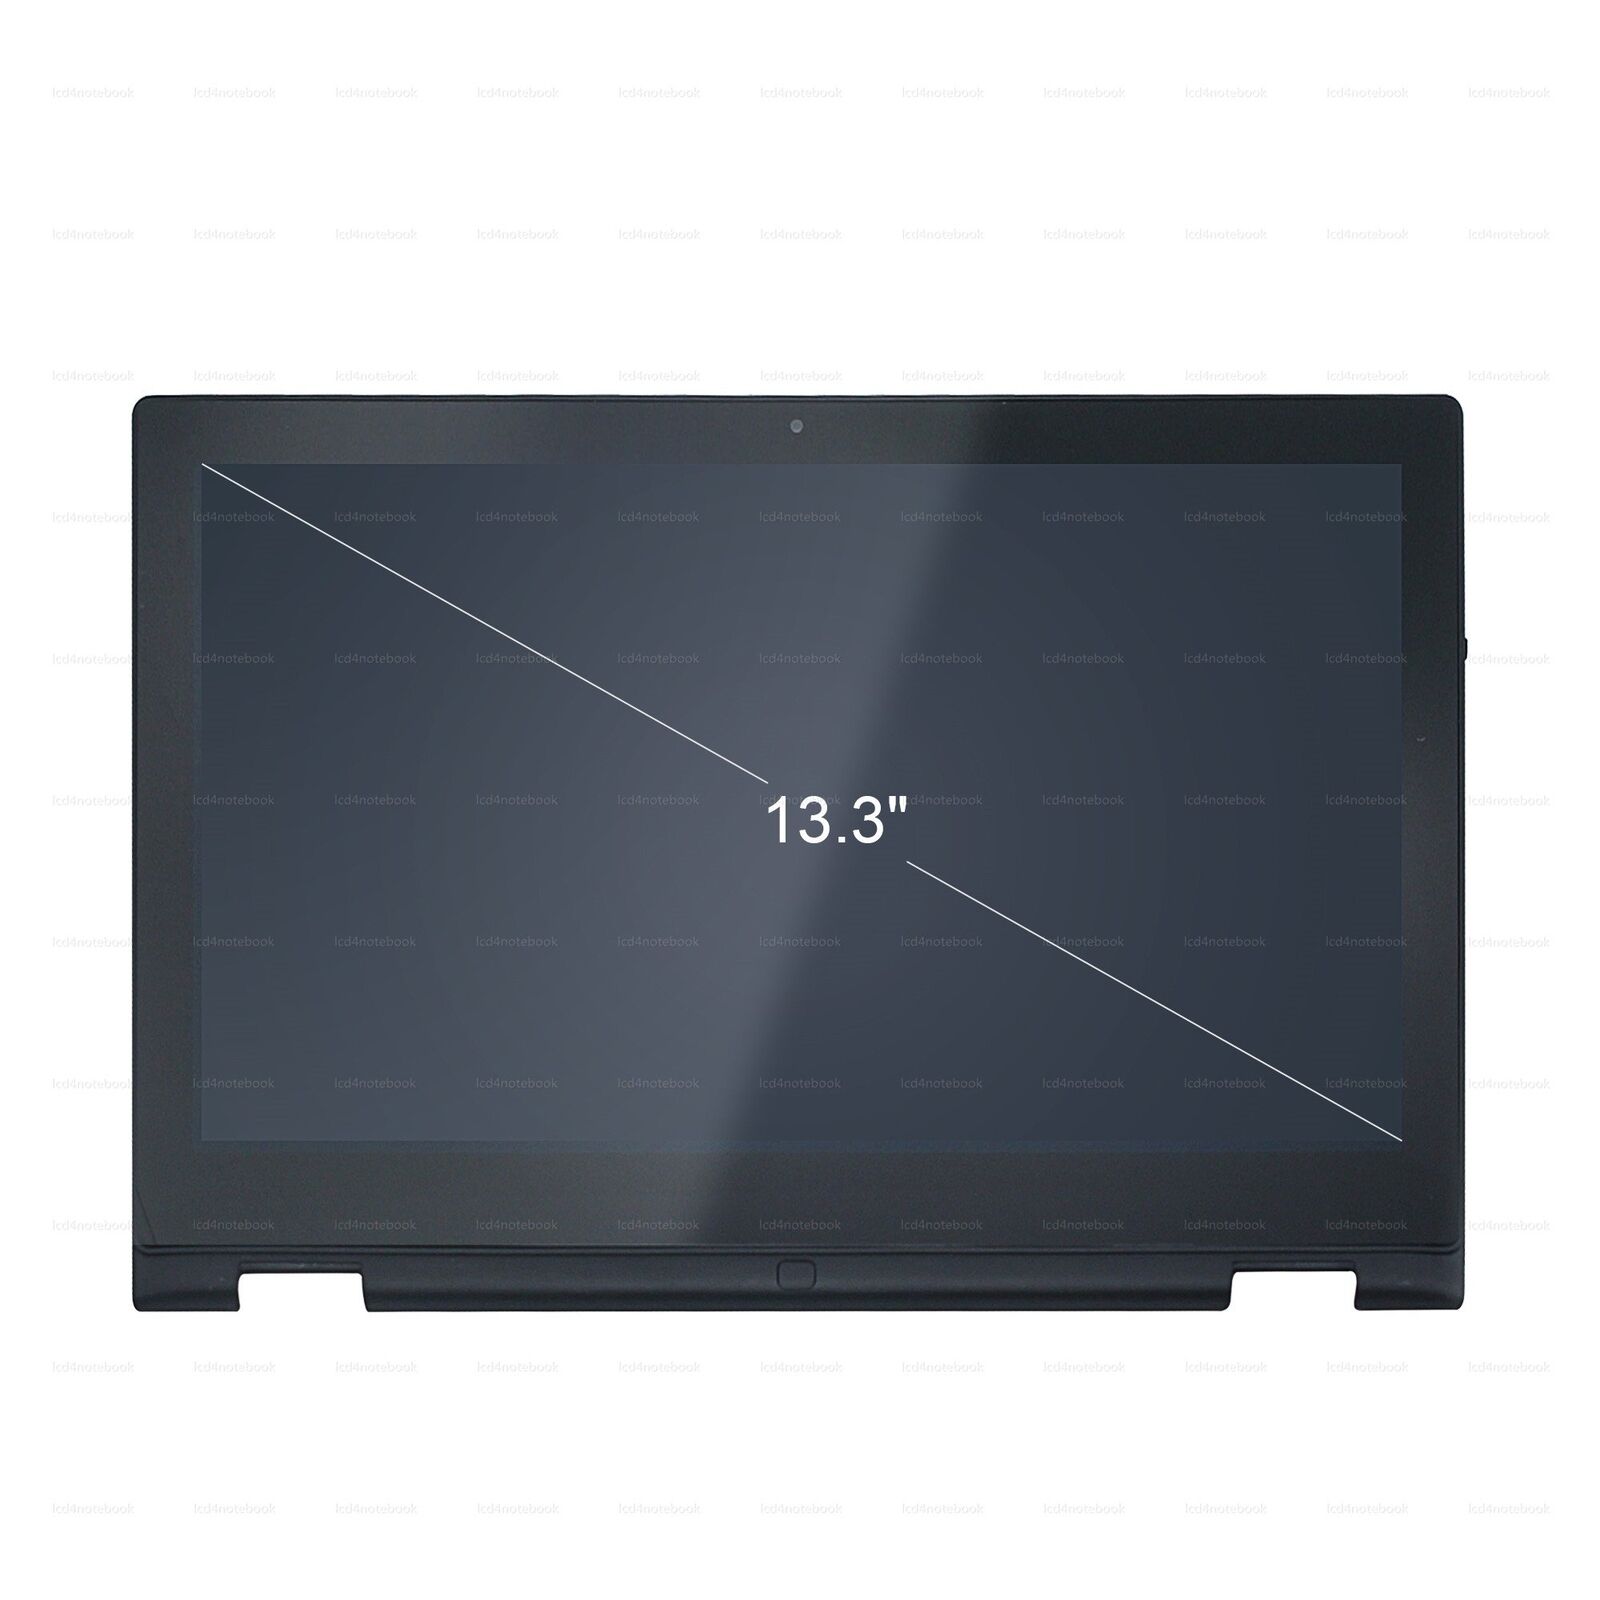 13.3 2-in-1 FHD LCD Touchscreen Digitizer+Bezel For Dell Inspiron 13 i7359 1080P